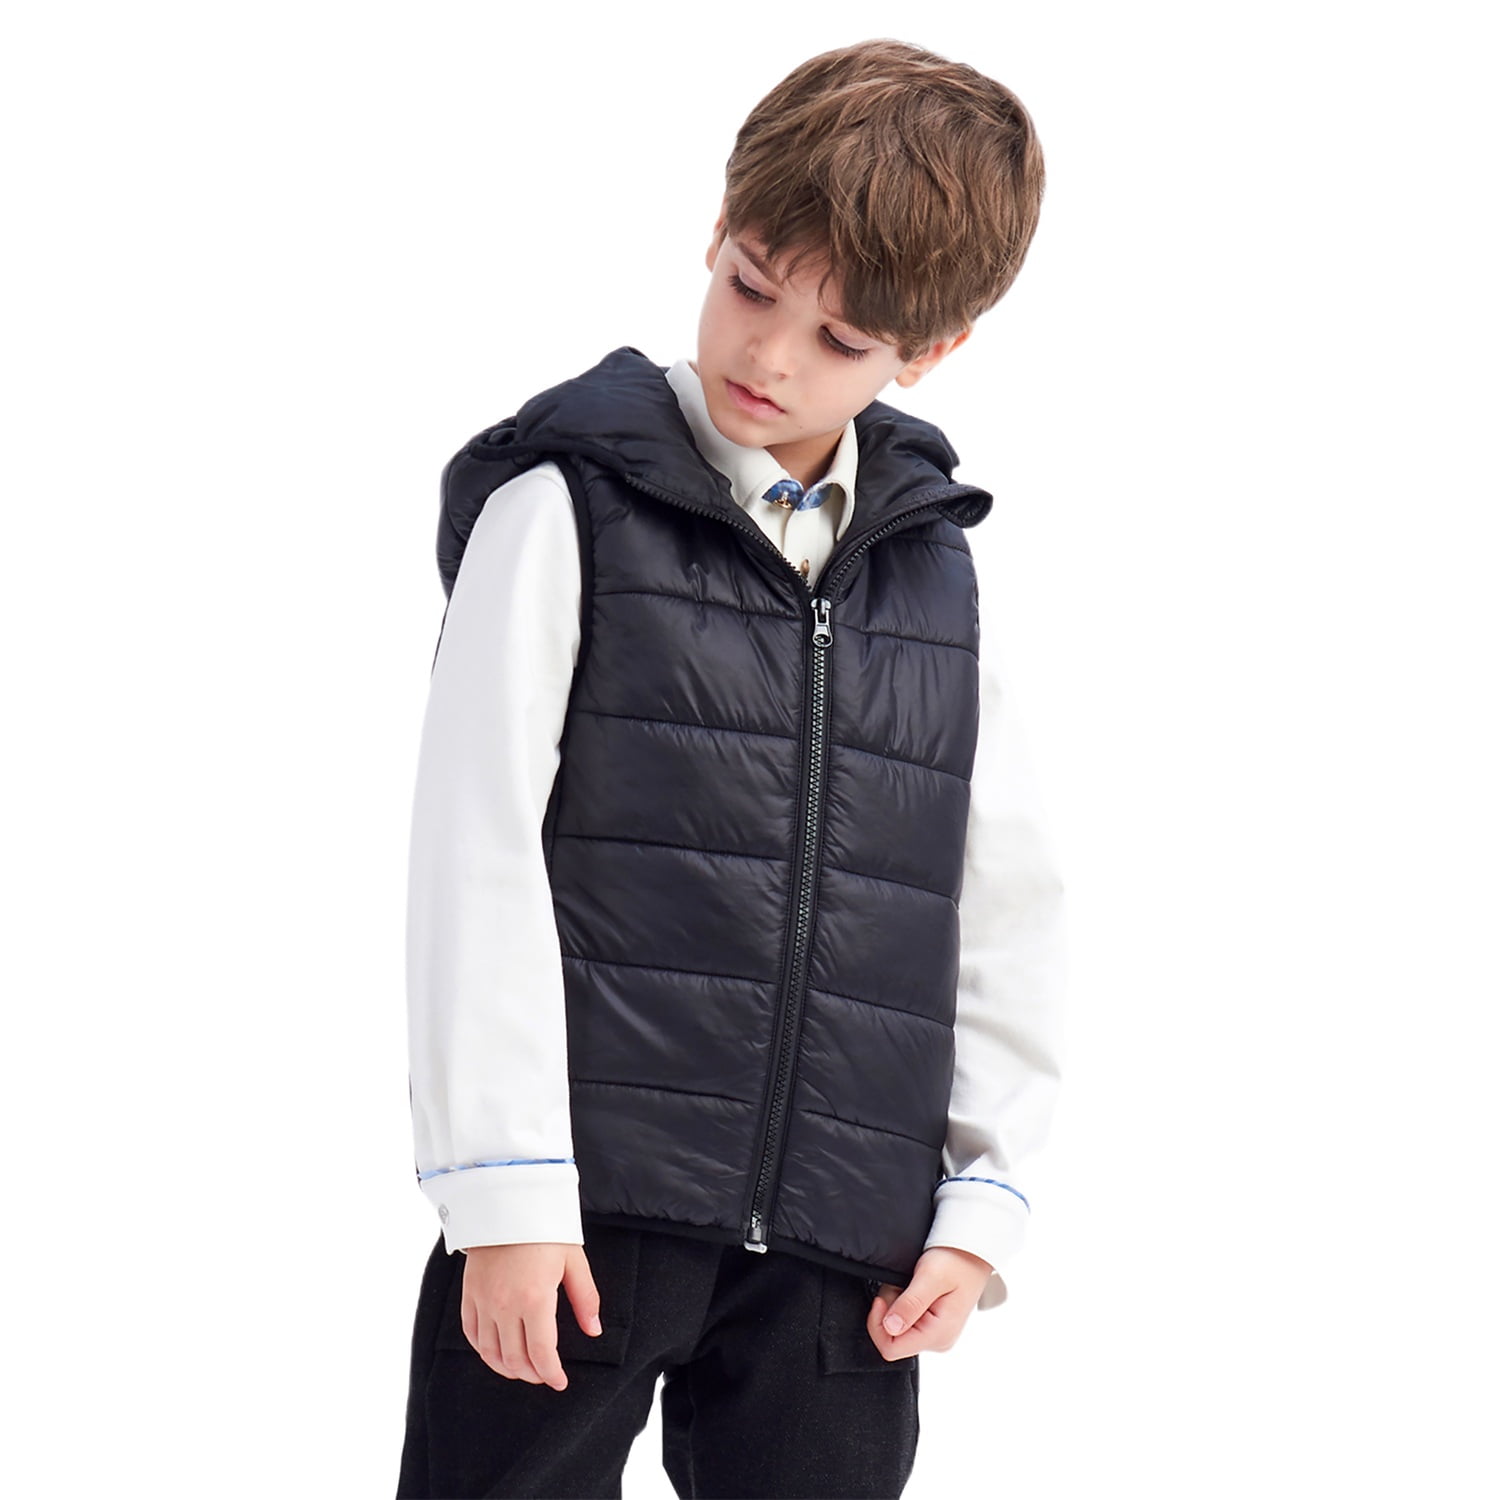 Essentials Boys and Toddlers' Heavy-Weight Puffer Vests